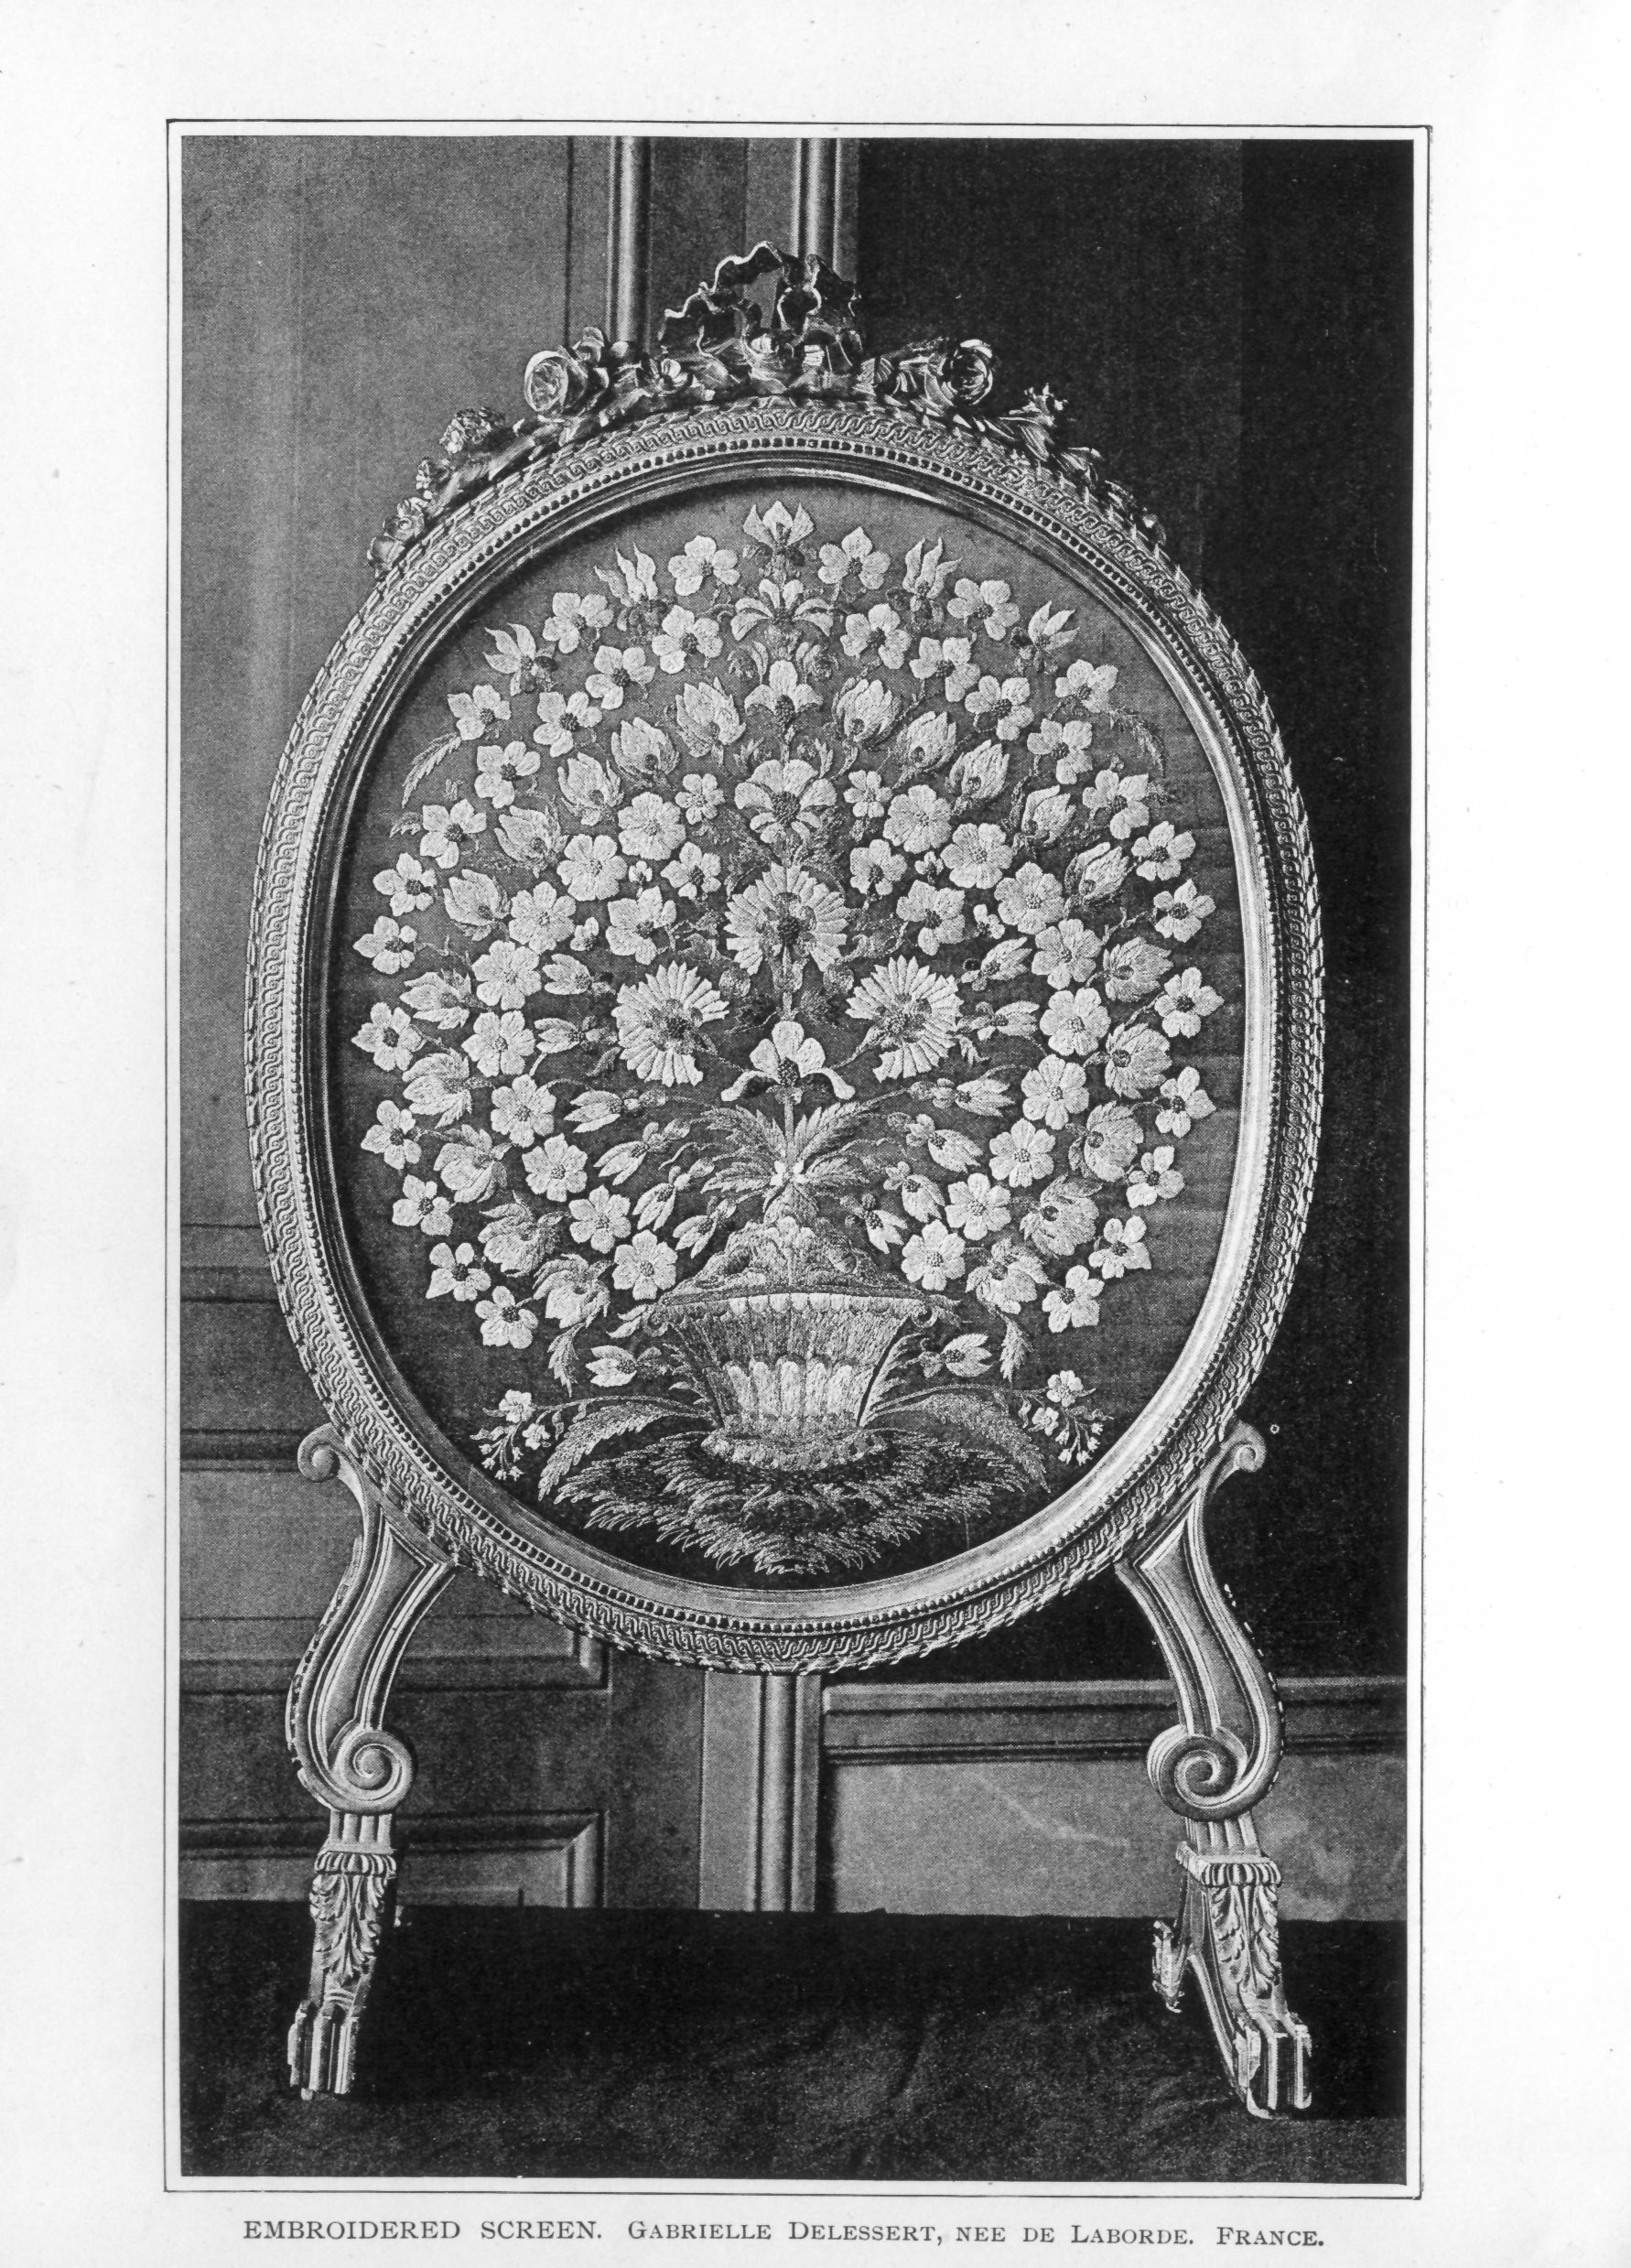 large oval screen decorated with intricate floral design